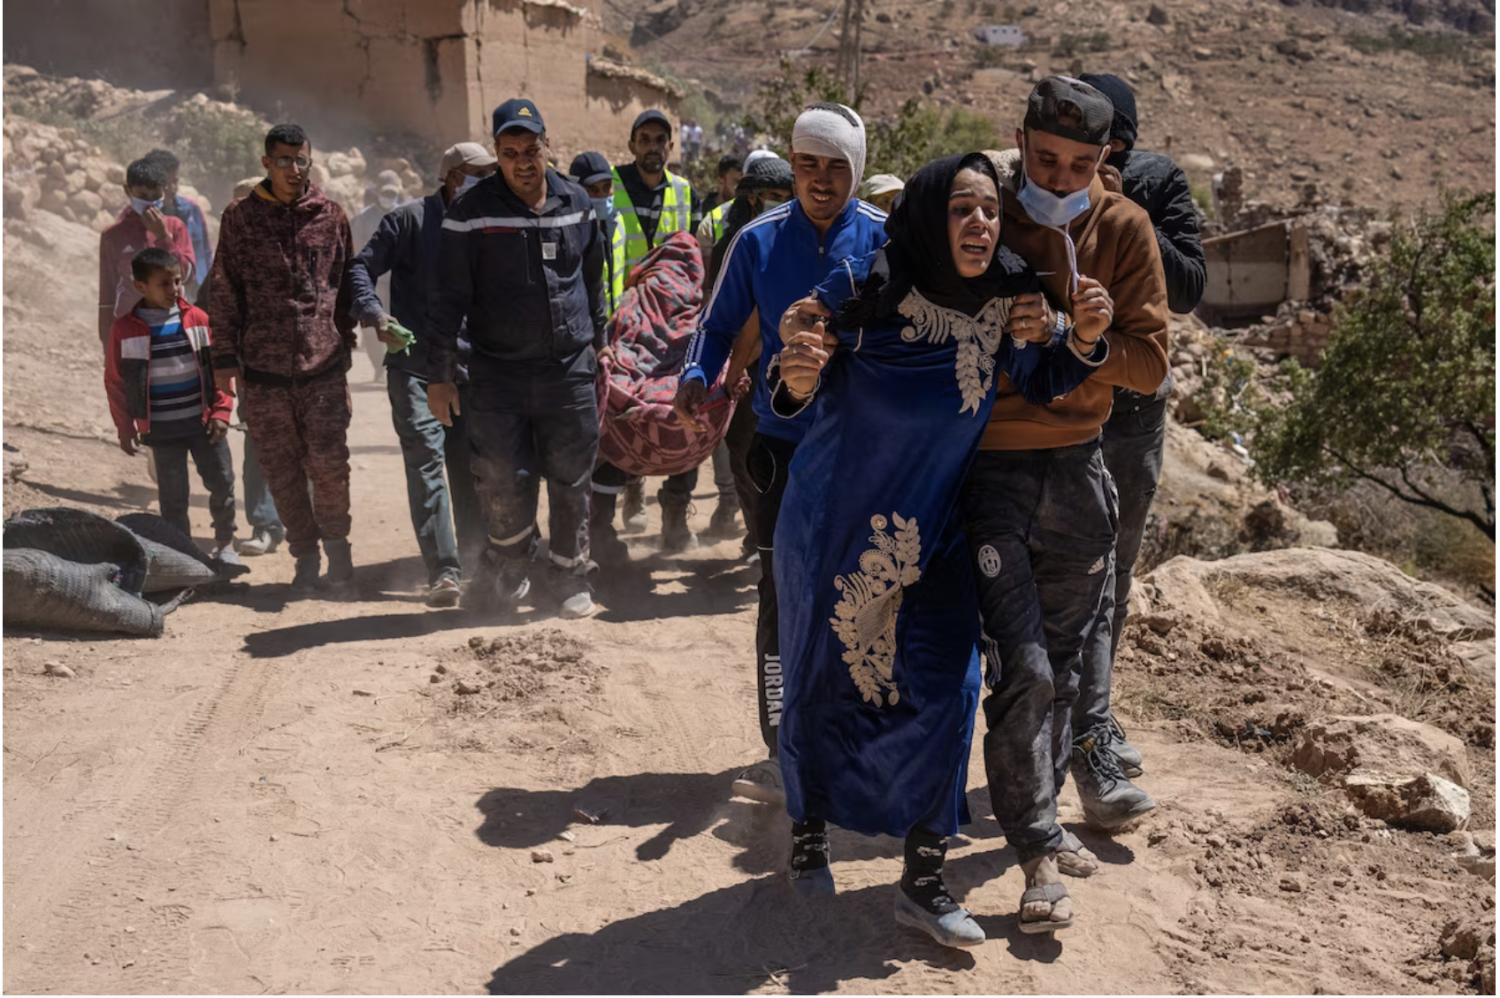 In Morocco’s quake-decimated villages, rescuers find only bodies